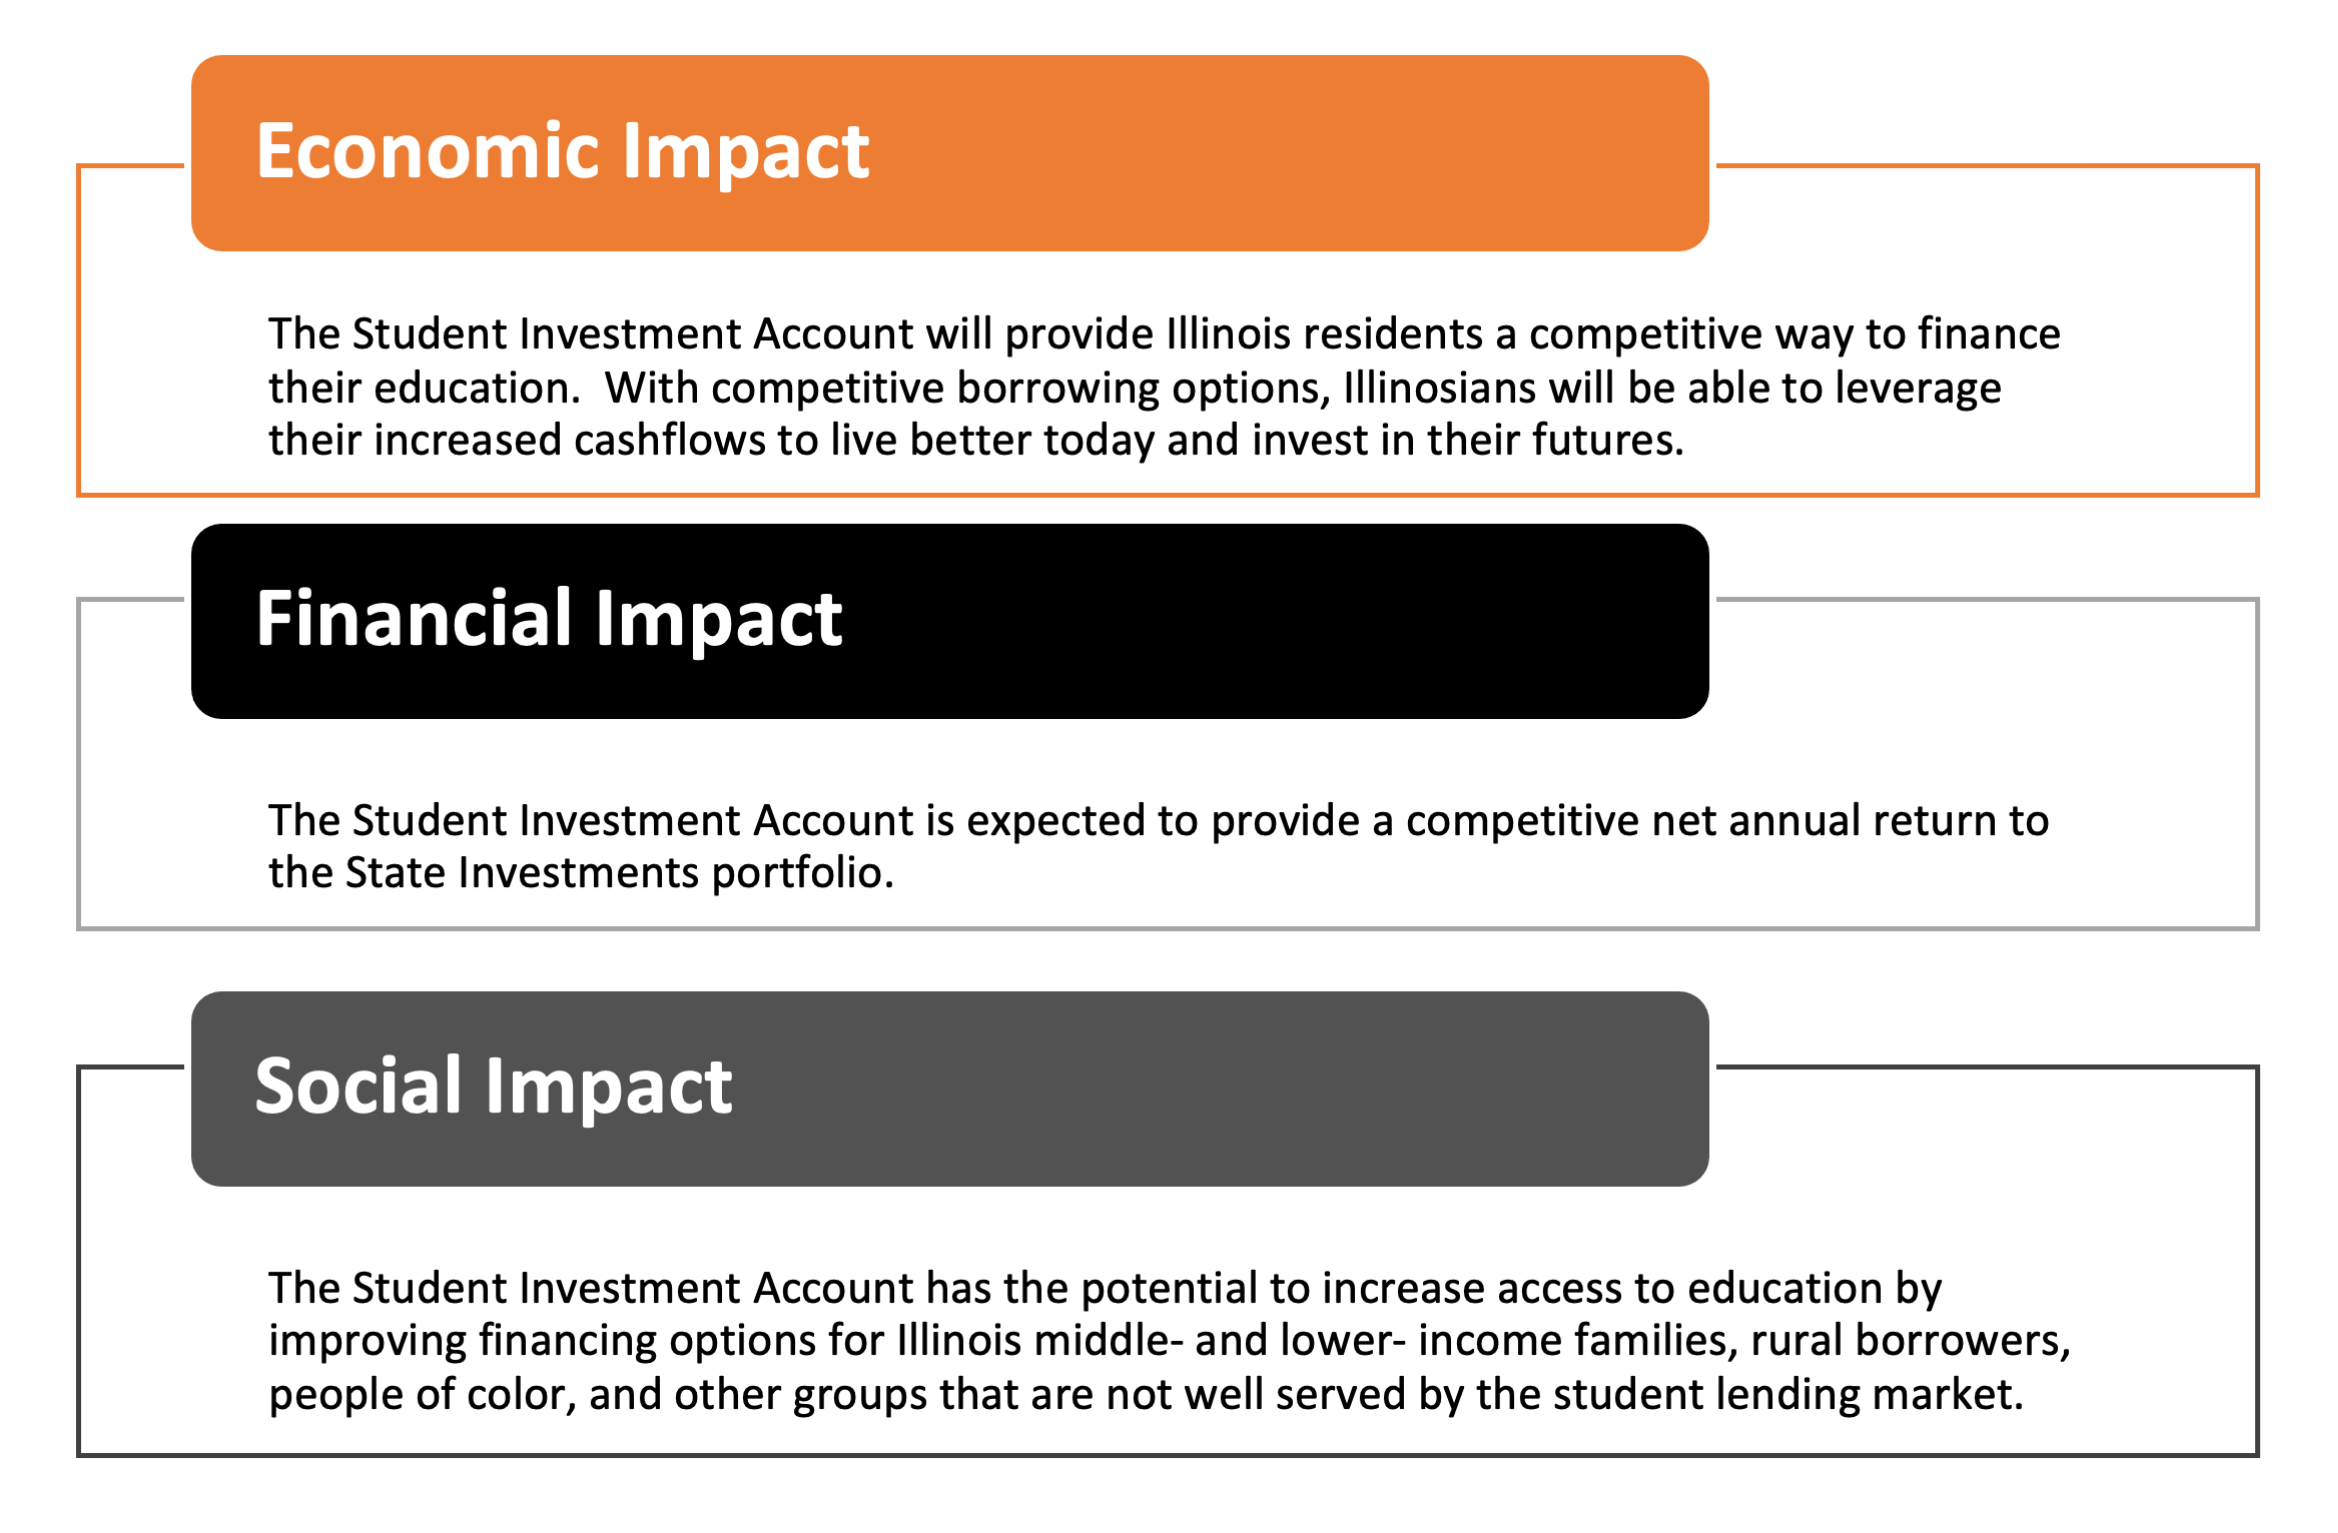 Economic, Financial and Social Impact of Student Investment Account Aims